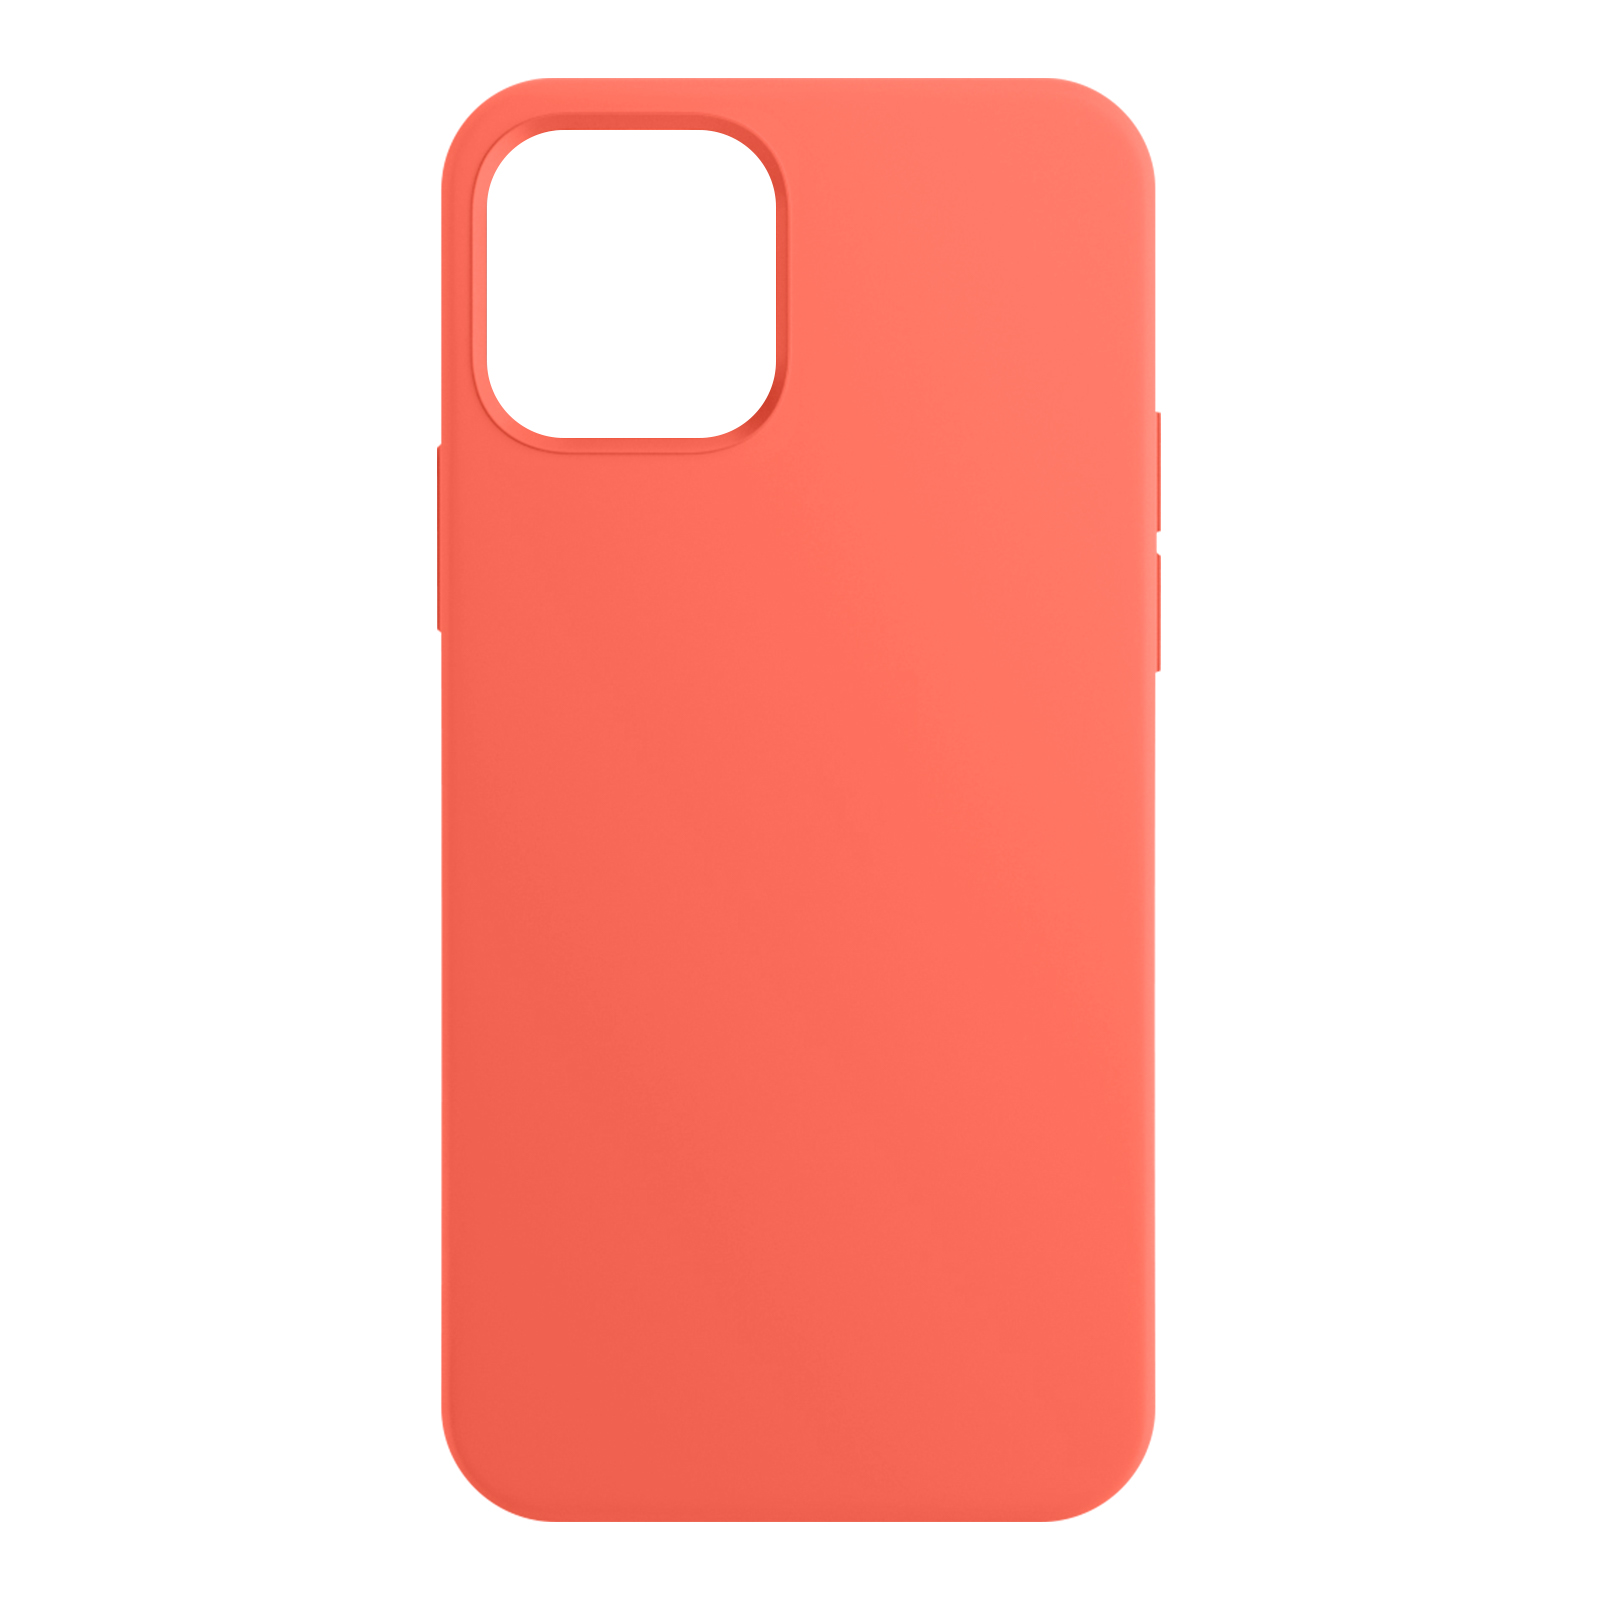 iPhone Backcover, BeFluo Apple, 14, Korallenrot Series, MOXIE